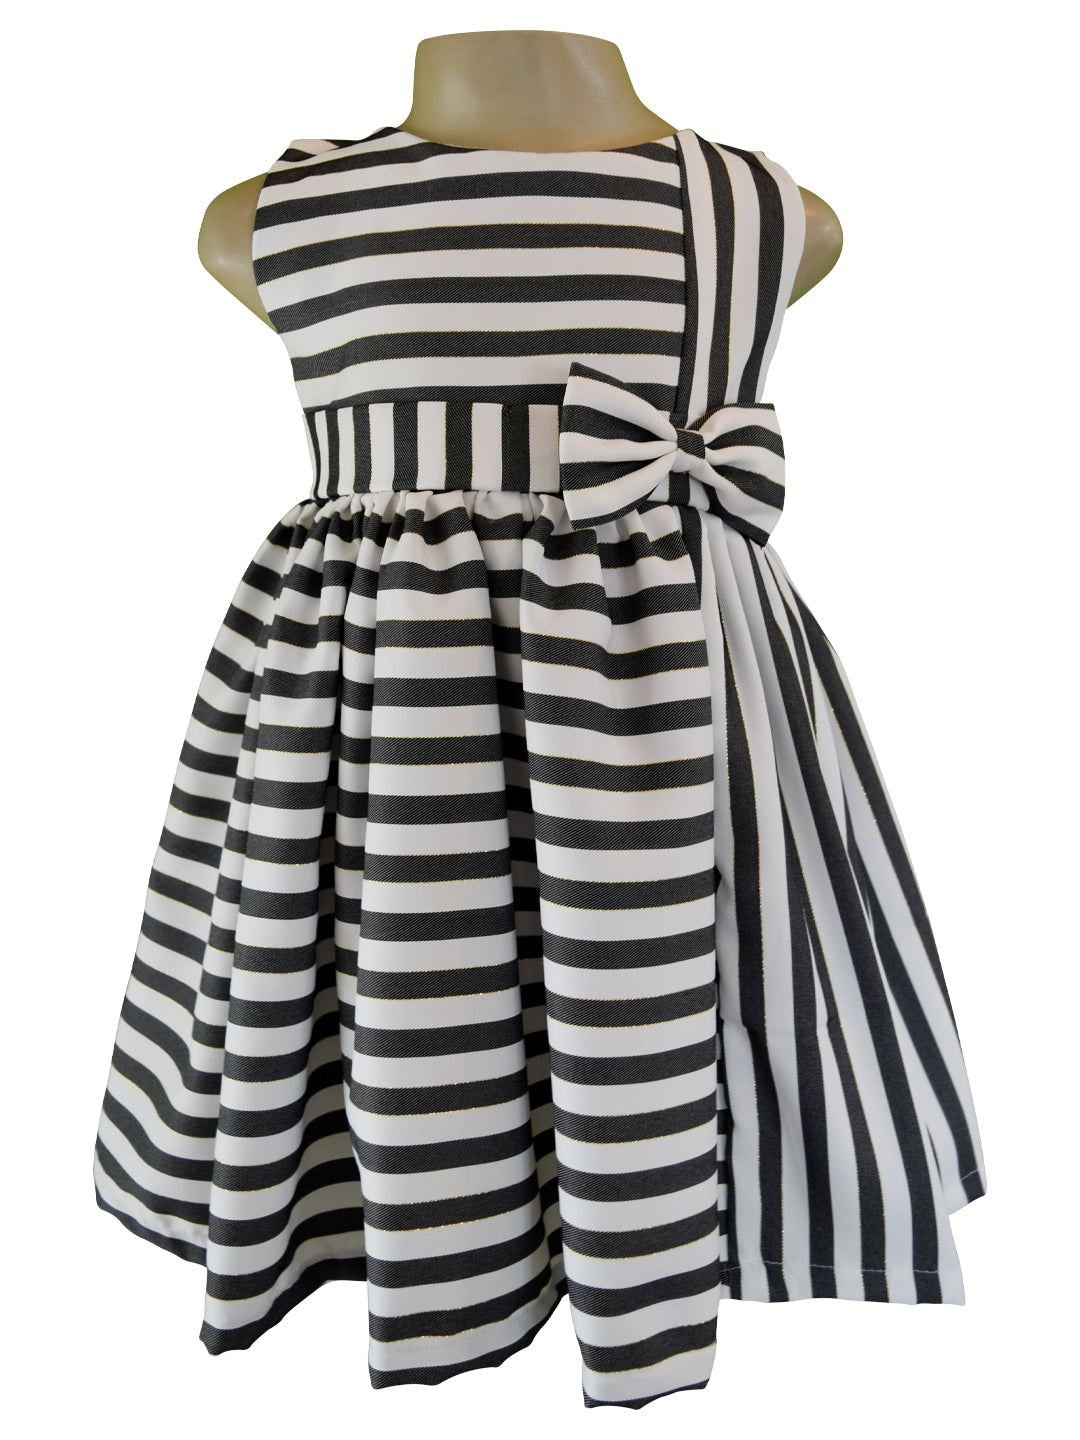 Buy Hipcastle Its Black and White Vertical Striped Stretchable Long Dress  Small at Amazonin